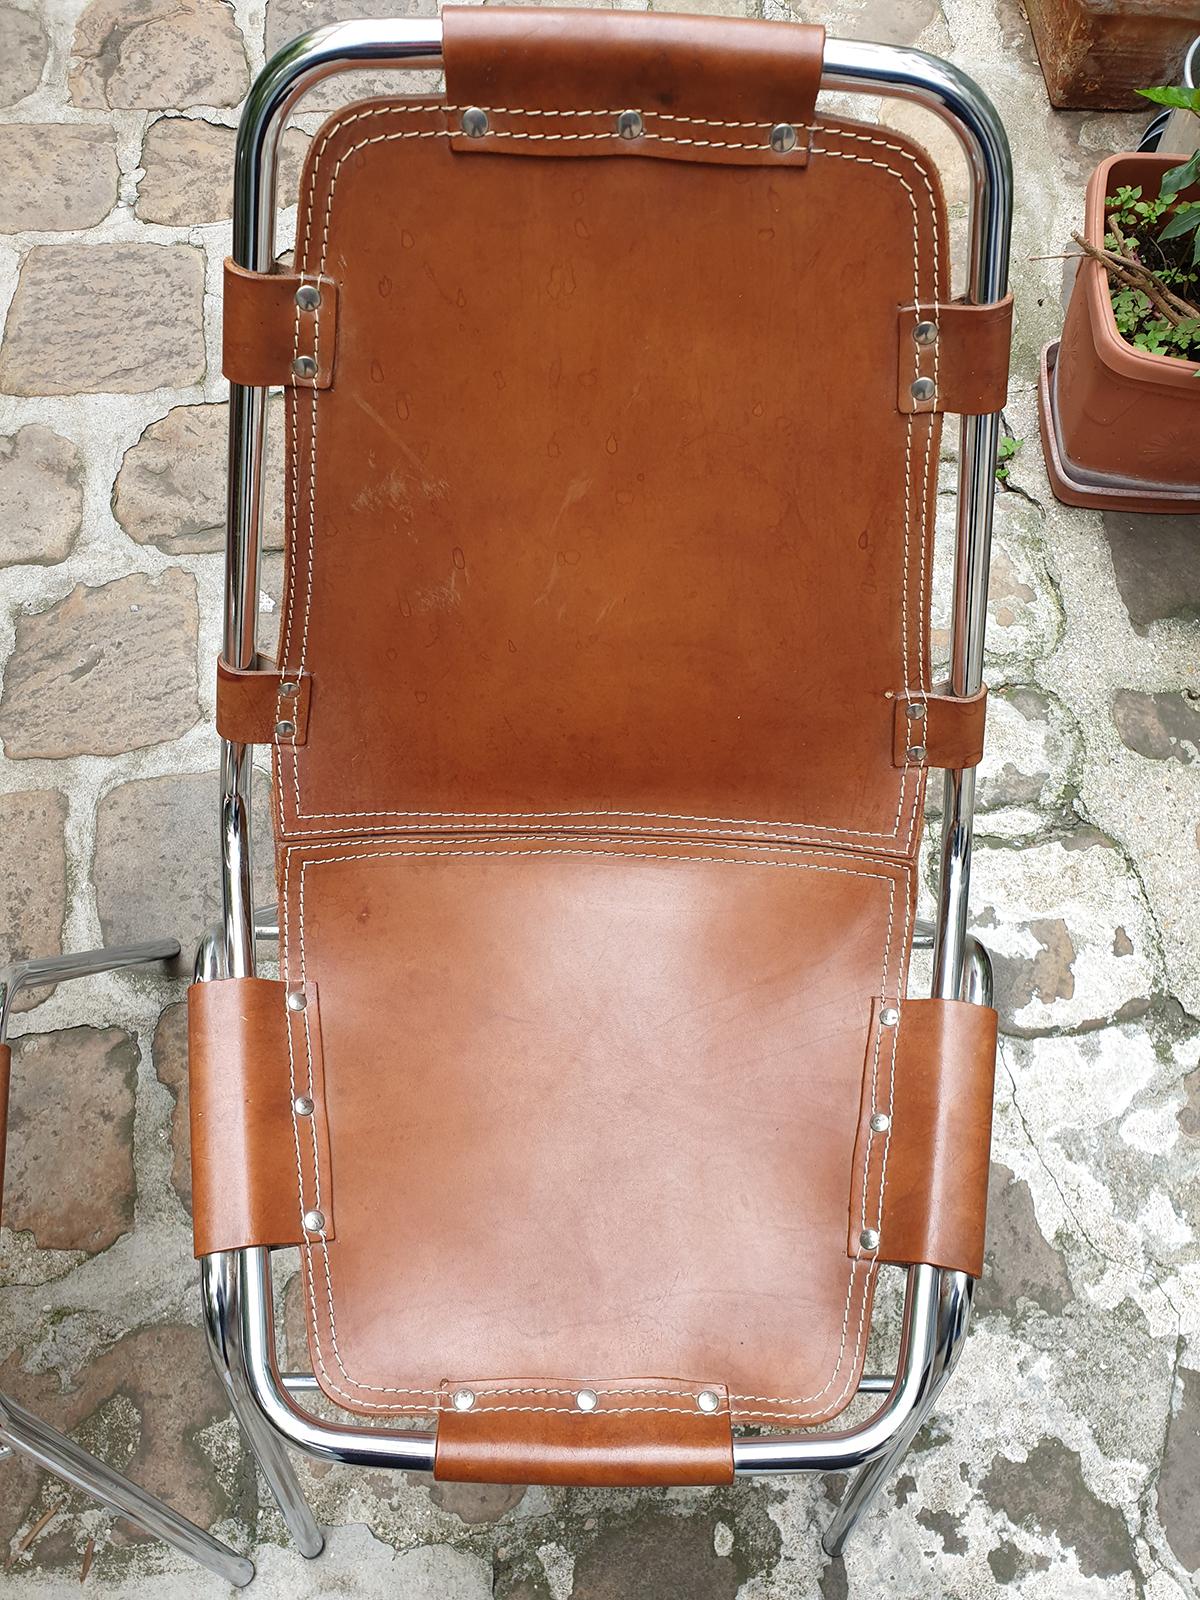 Charlotte Perriand
Pair of Les Arcs chairs, Cassina edition, circa 1960

Cowhide leather and steel

Size: Length 47 cm
Width 59 cm
Height 82 cm
Seat height 44 cm

excellent condition
Selling price: 2600 Euros.